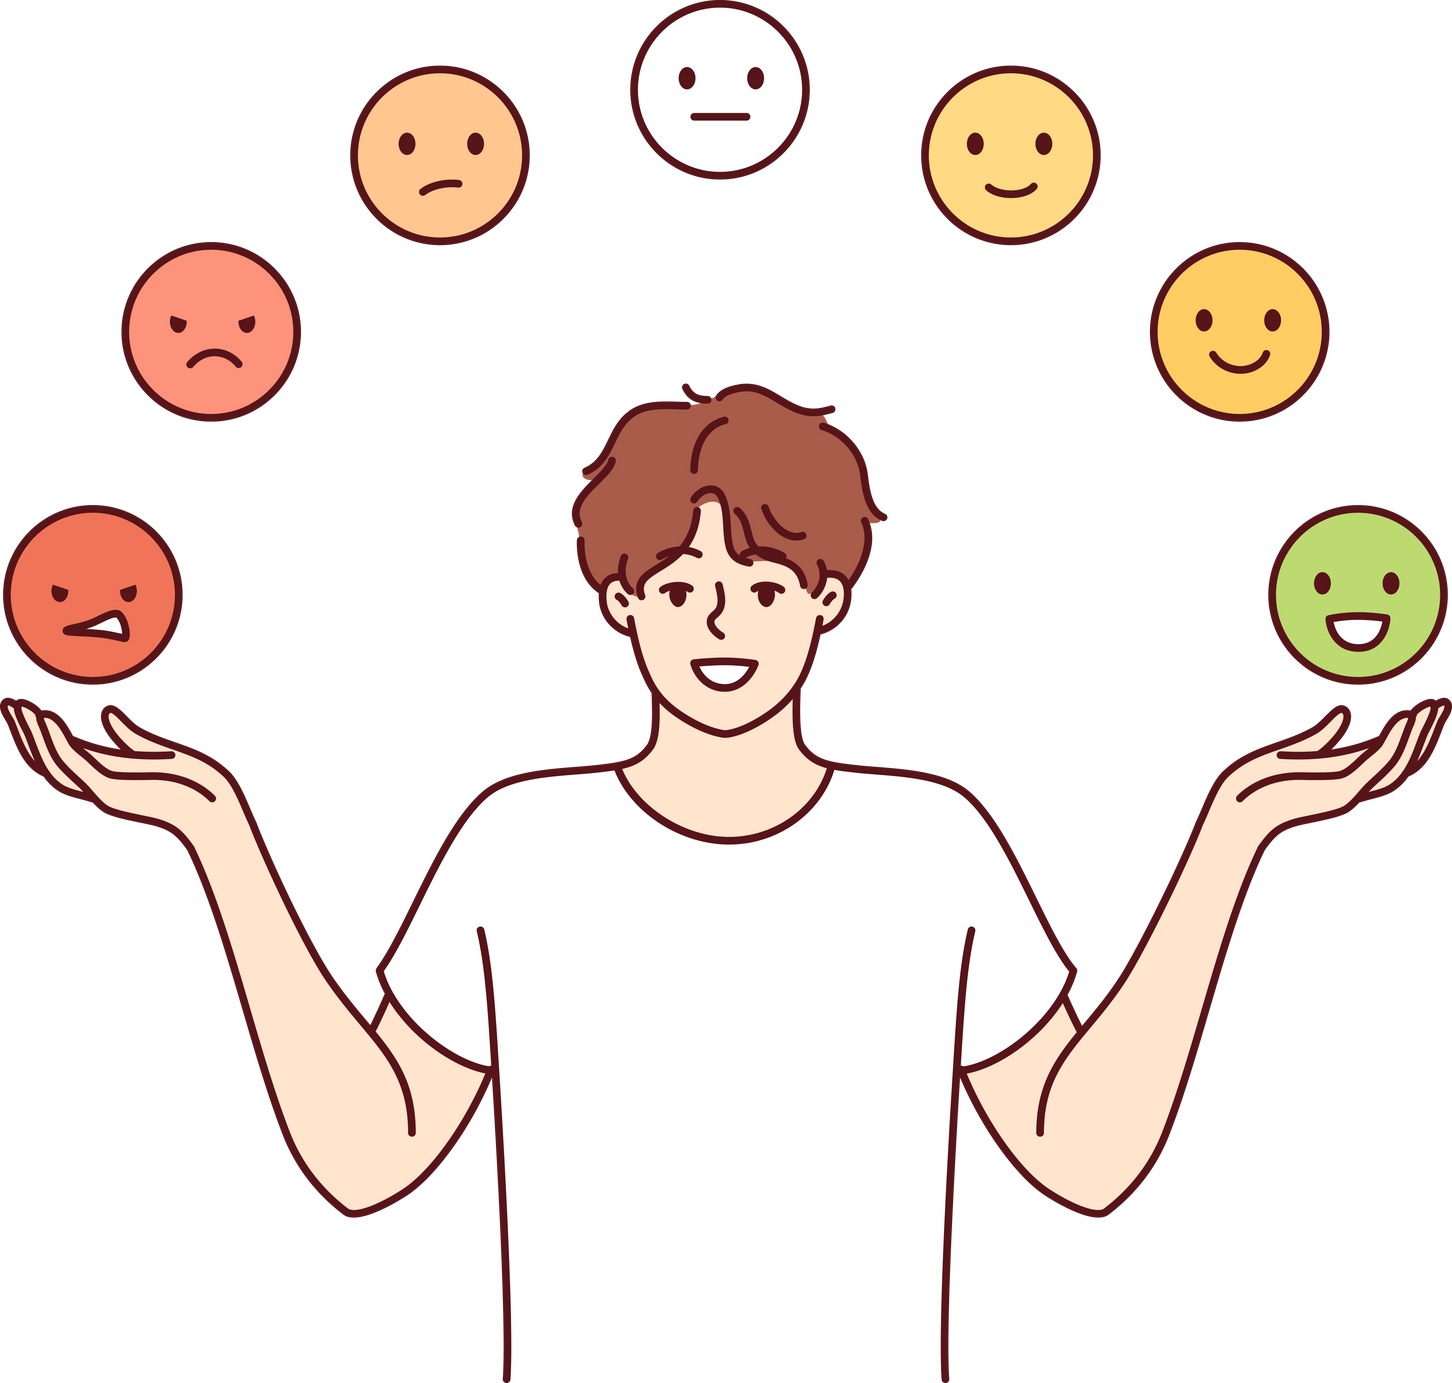 Man trying to maintain emotional balance by juggling emoticons with positive and negative emotions